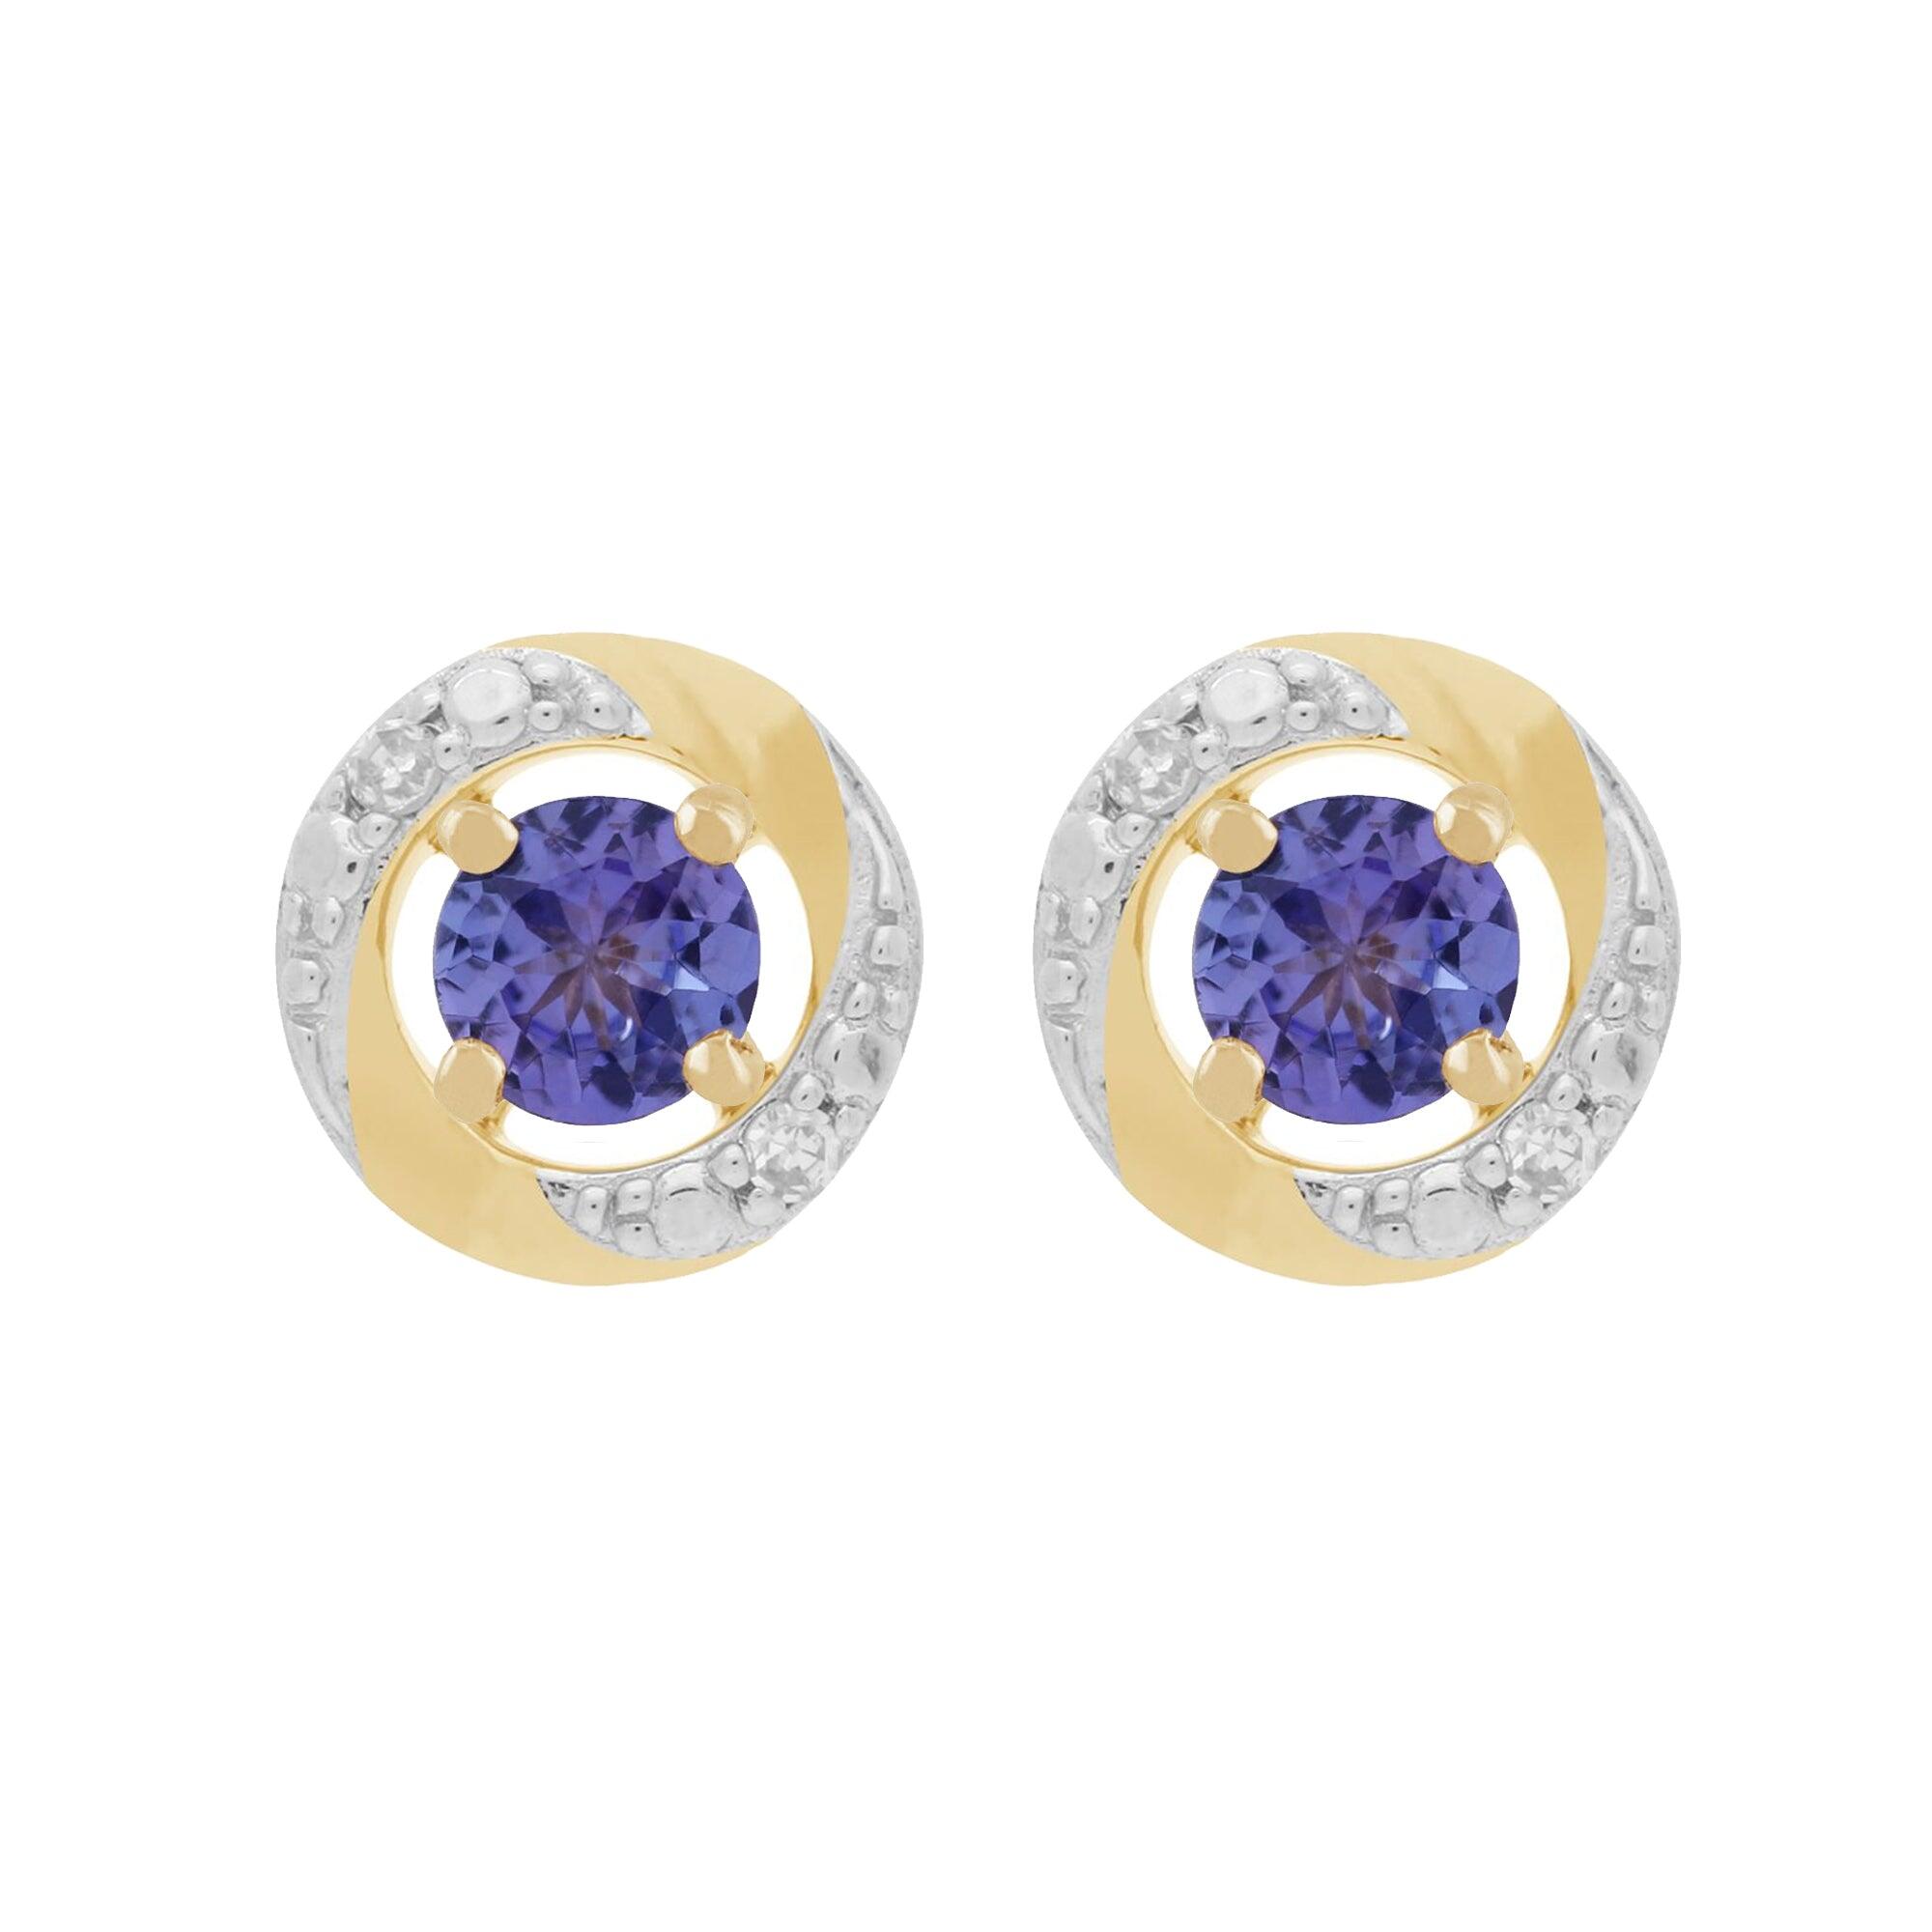 Classic Round Tanzanite Stud Earrings with Detachable Diamond Halo Ear Jacket in 9ct Yellow Gold